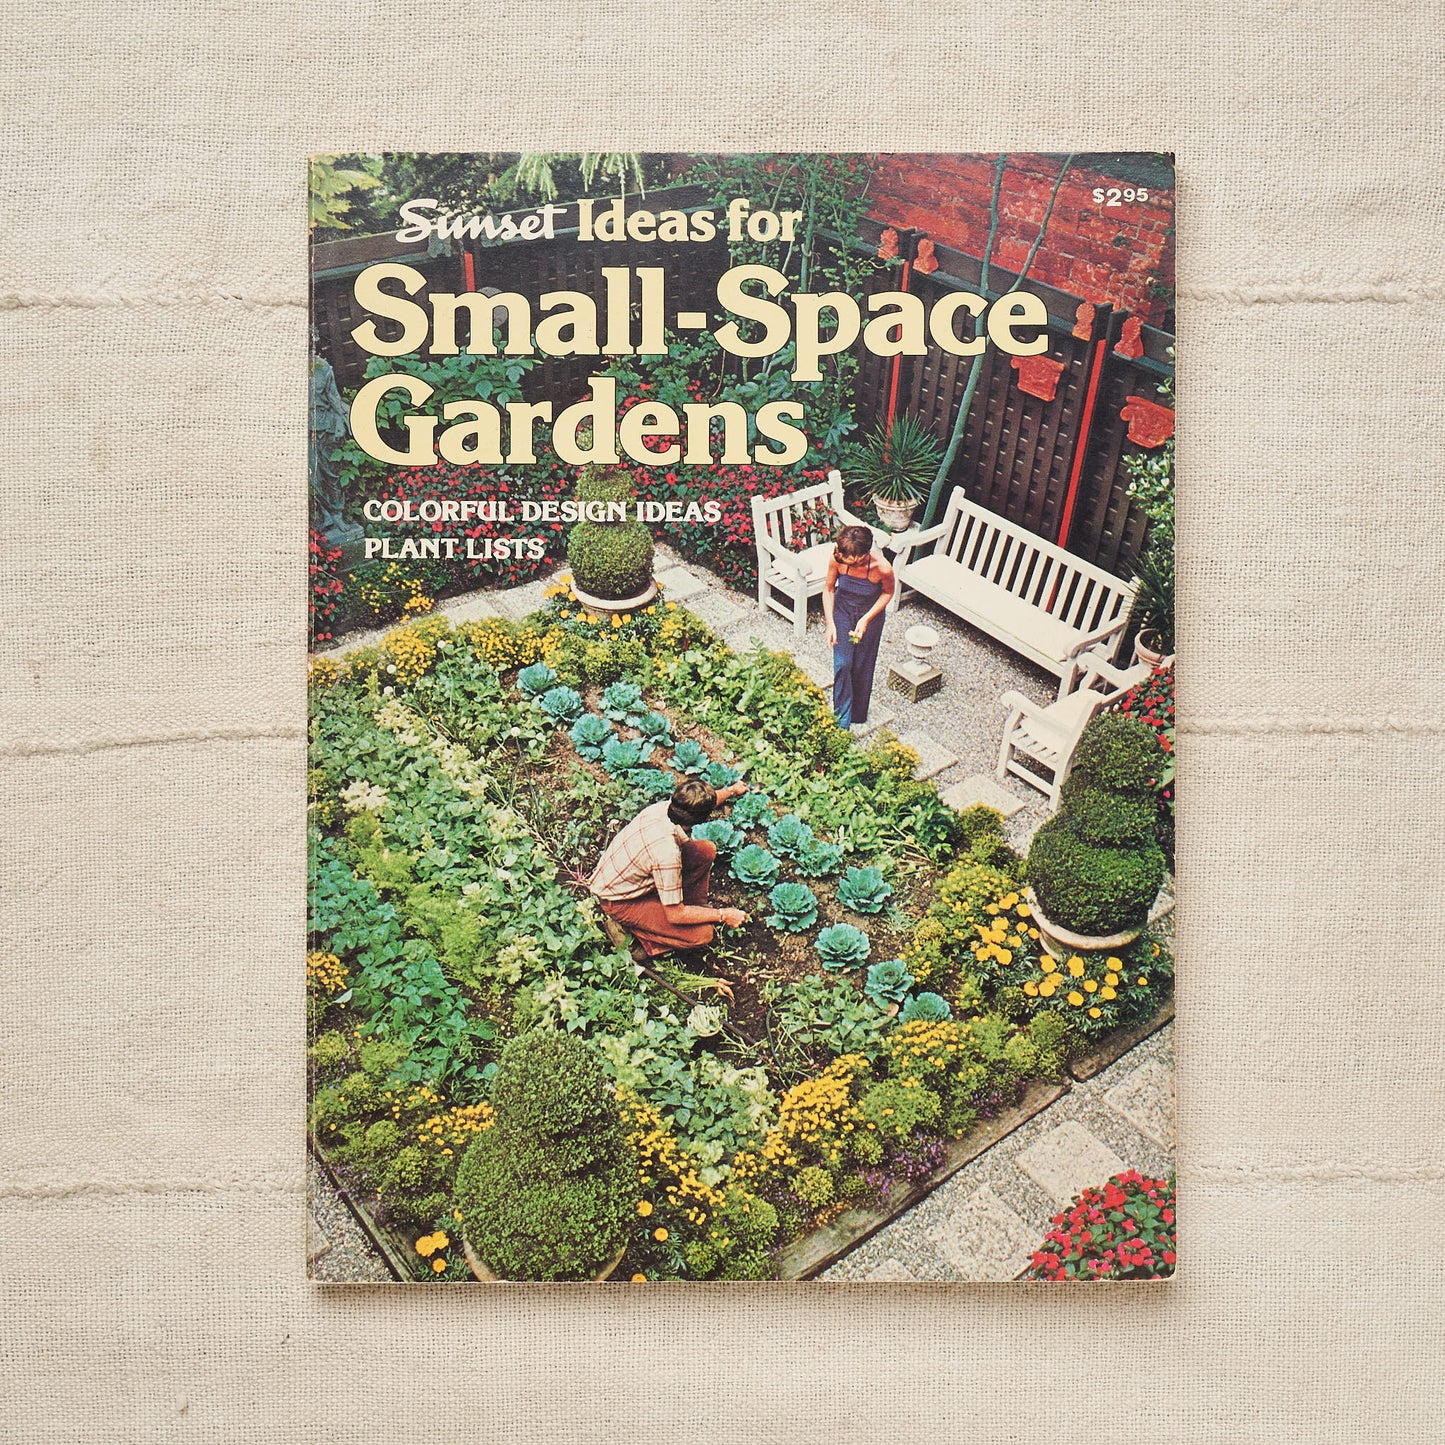 Ideas for Small-Space Gardens